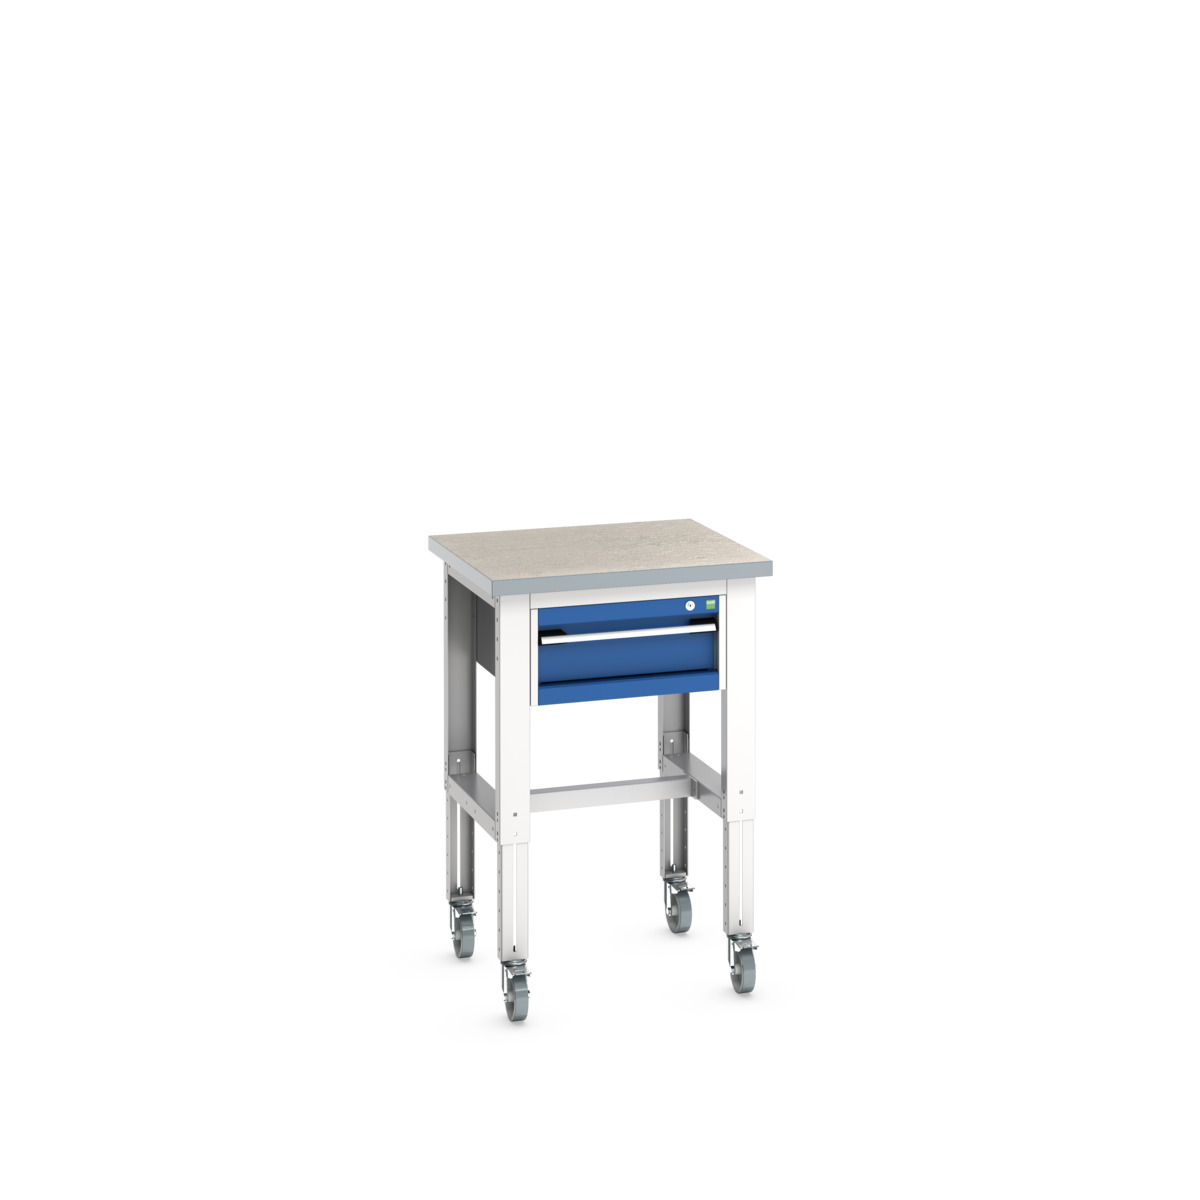 41003273.11V - cubio mobile bench adj height (mpx)